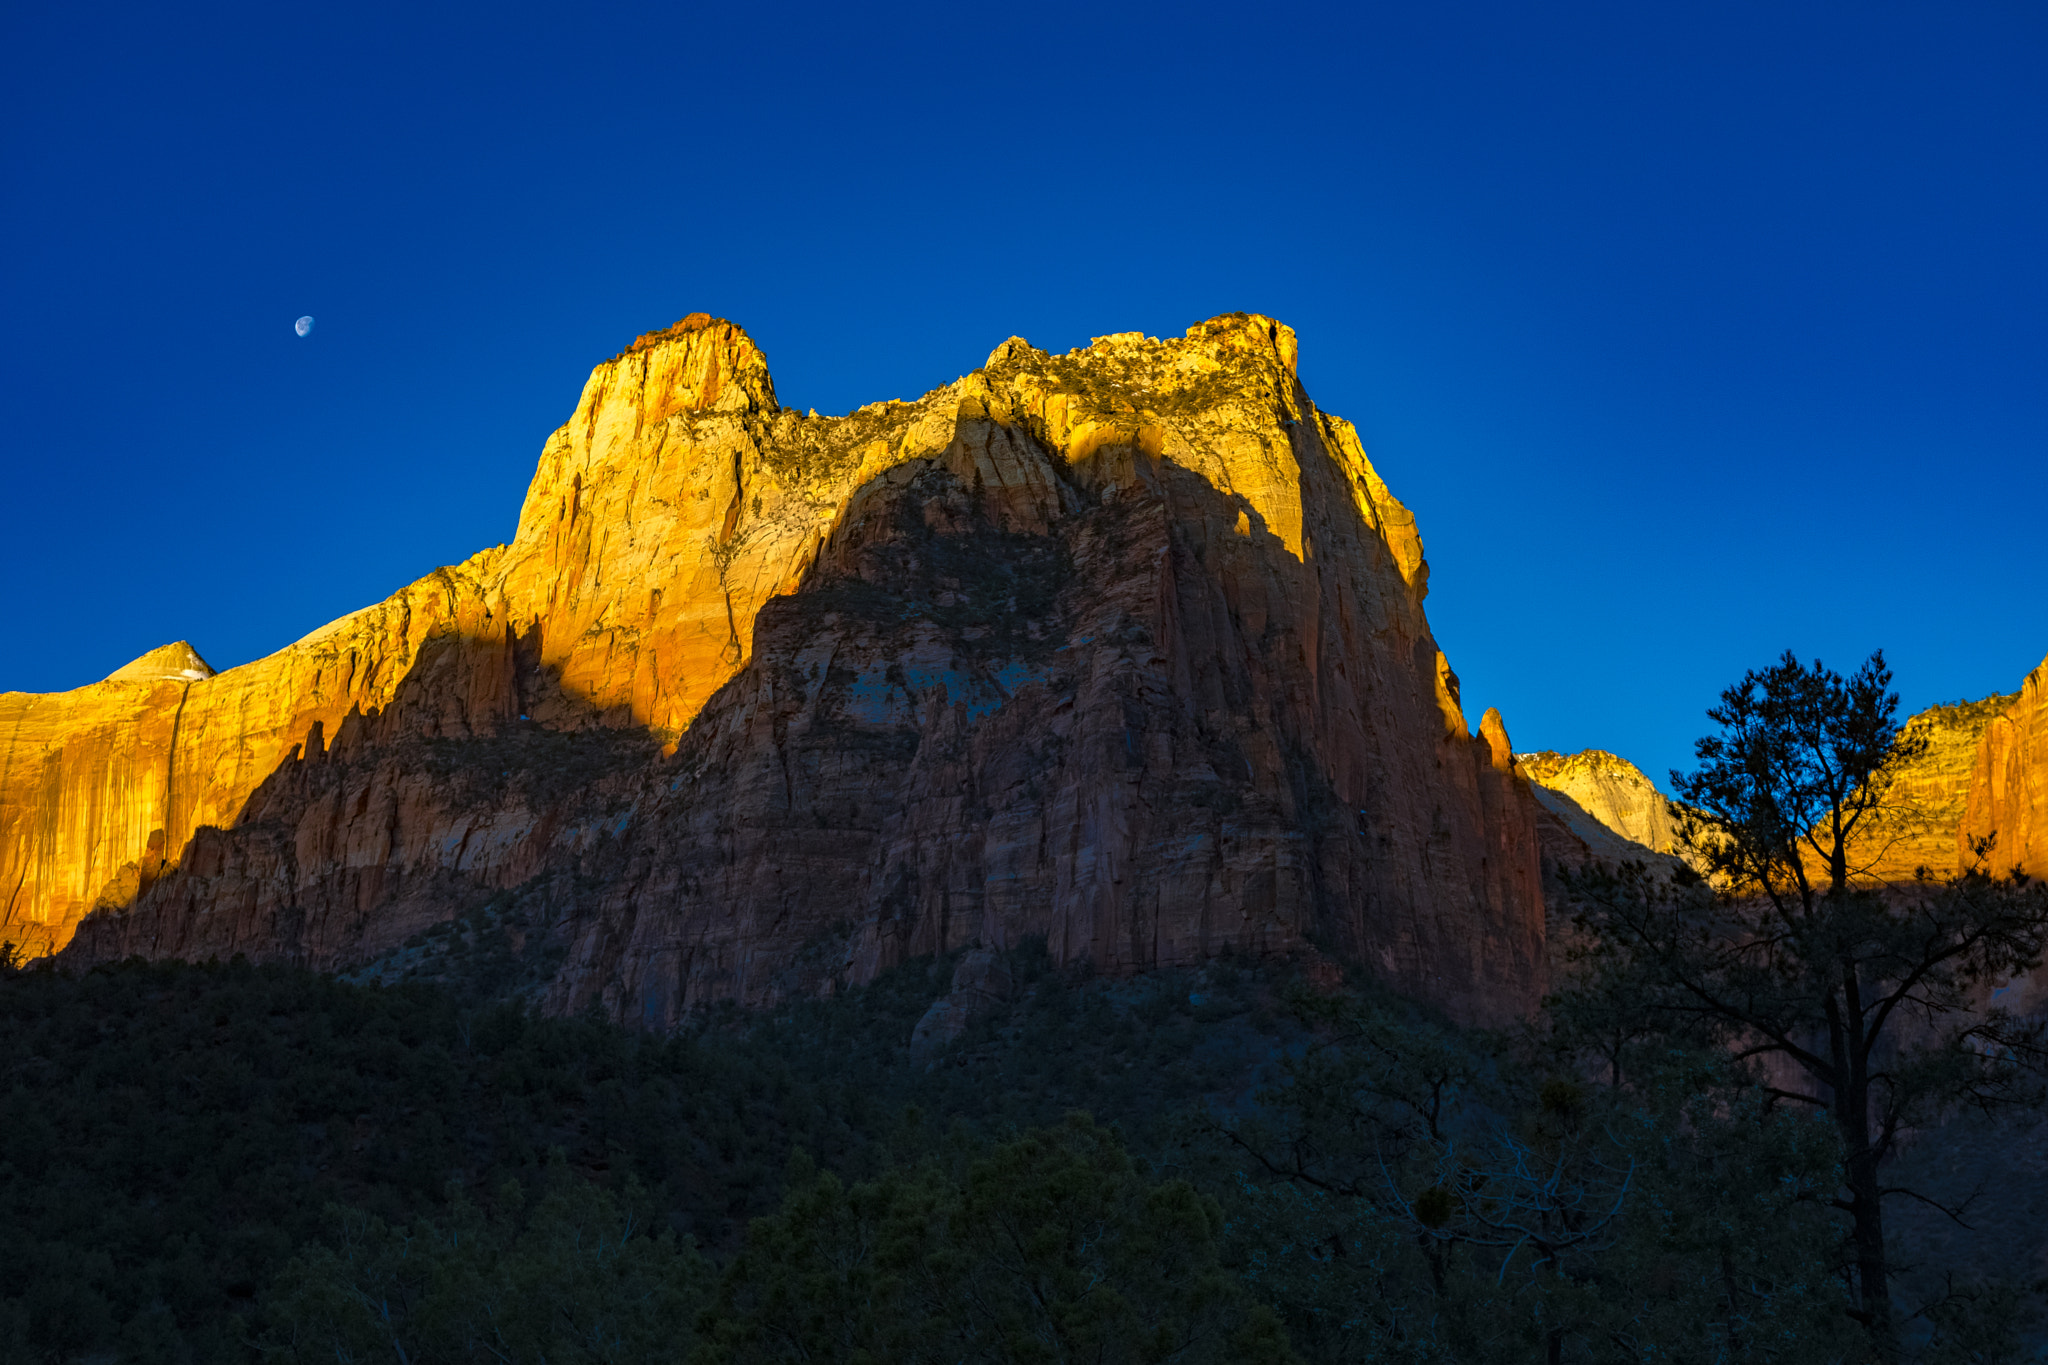 Fujifilm X-T2 + Fujifilm XF 27mm F2.8 sample photo. Moonset over mt maroni in zion national park in color with shadow detail. photography